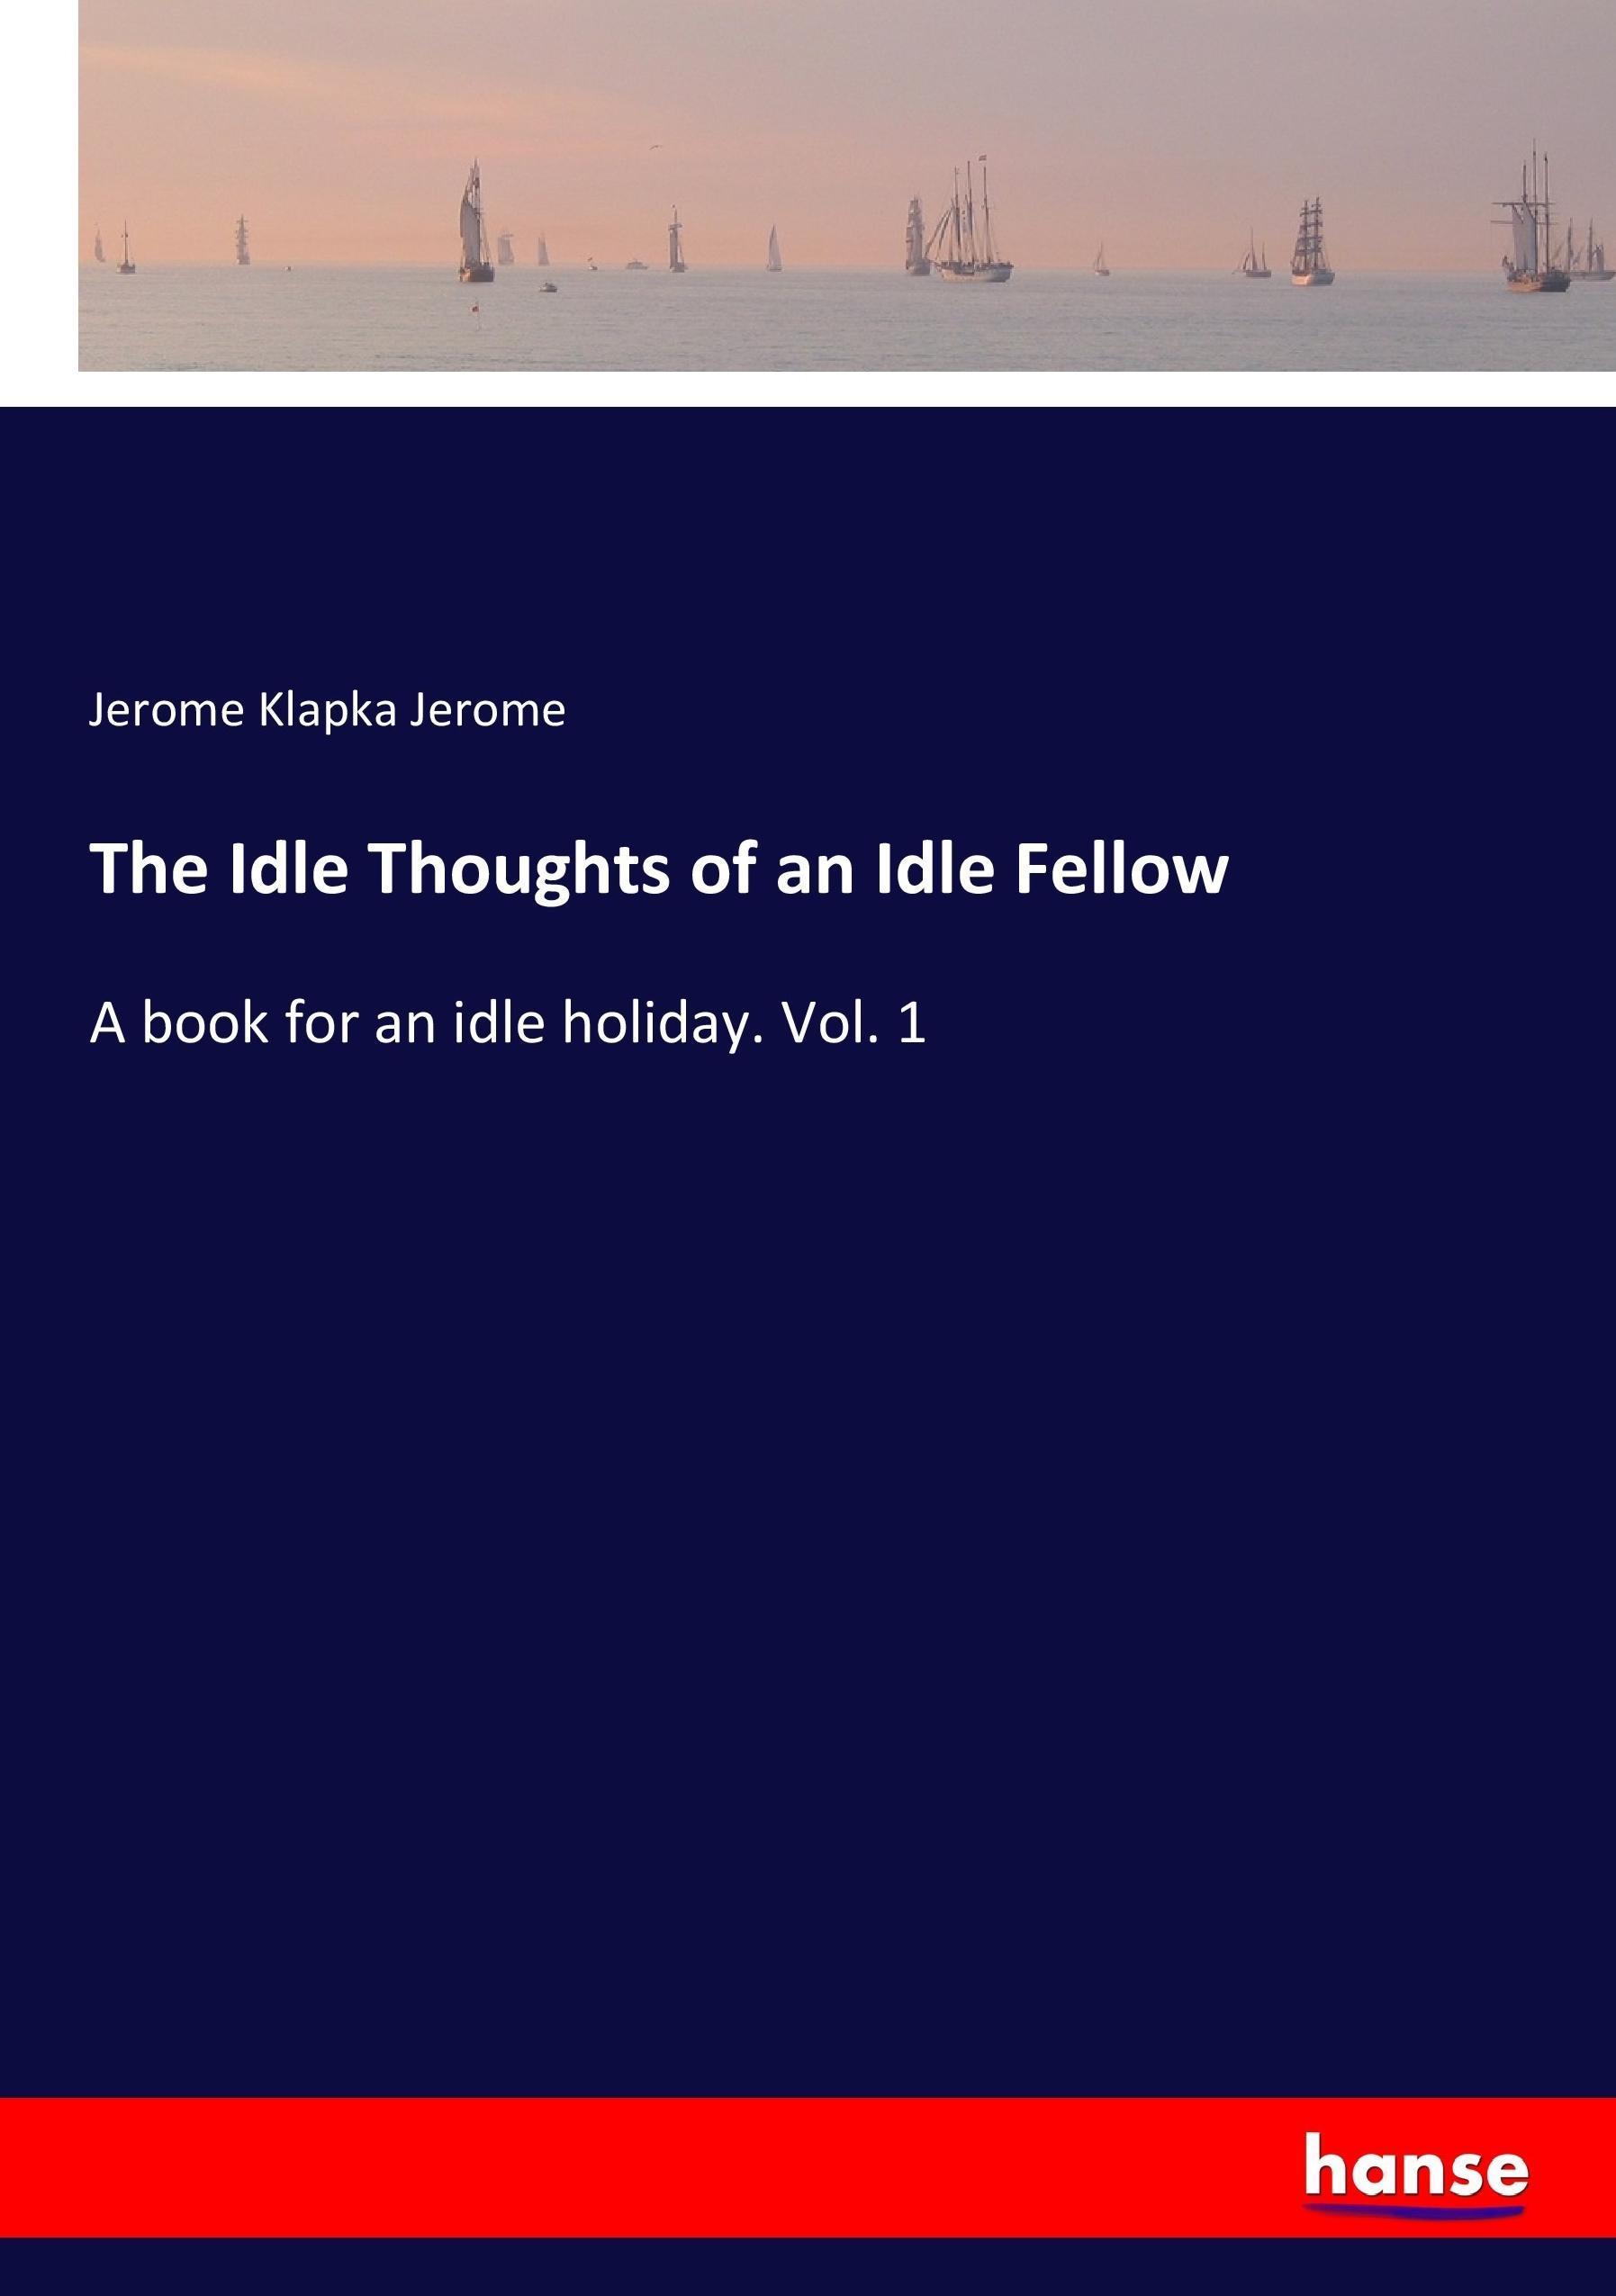 The Idle Thoughts of an Idle Fellow / A book for an idle holiday. Vol. 1 / Jerome Klapka Jerome / Taschenbuch / Paperback / 224 S. / Englisch / 2017 / hansebooks / EAN 9783337292096 - Jerome, Jerome Klapka